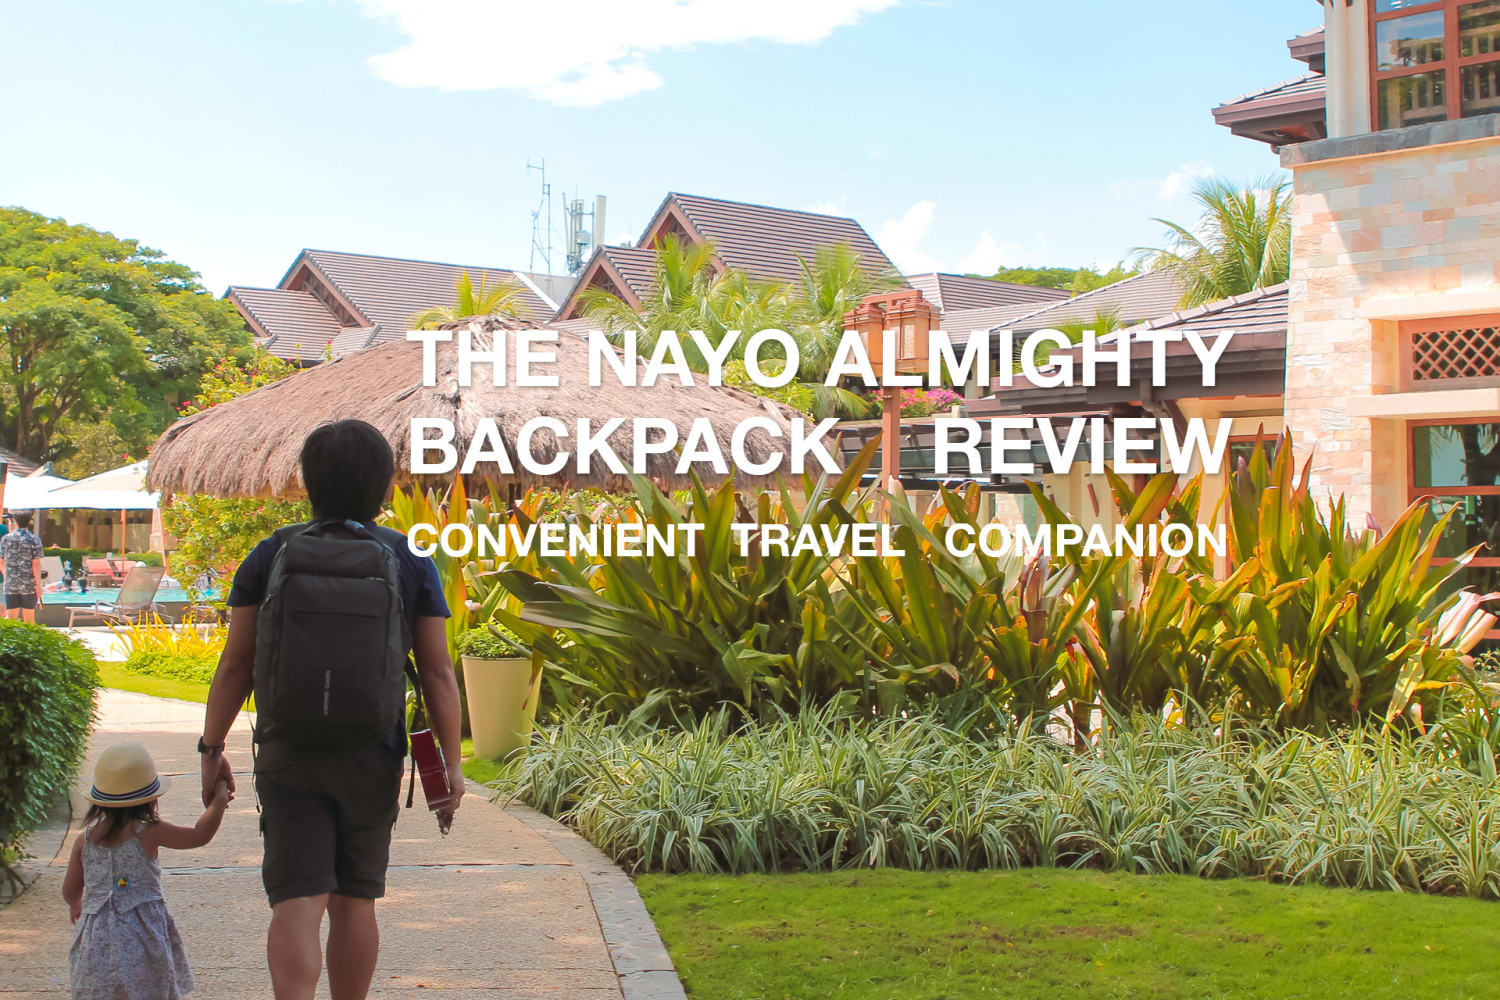 Smart Travel Companion: The Nayo Almighty Backpack Review